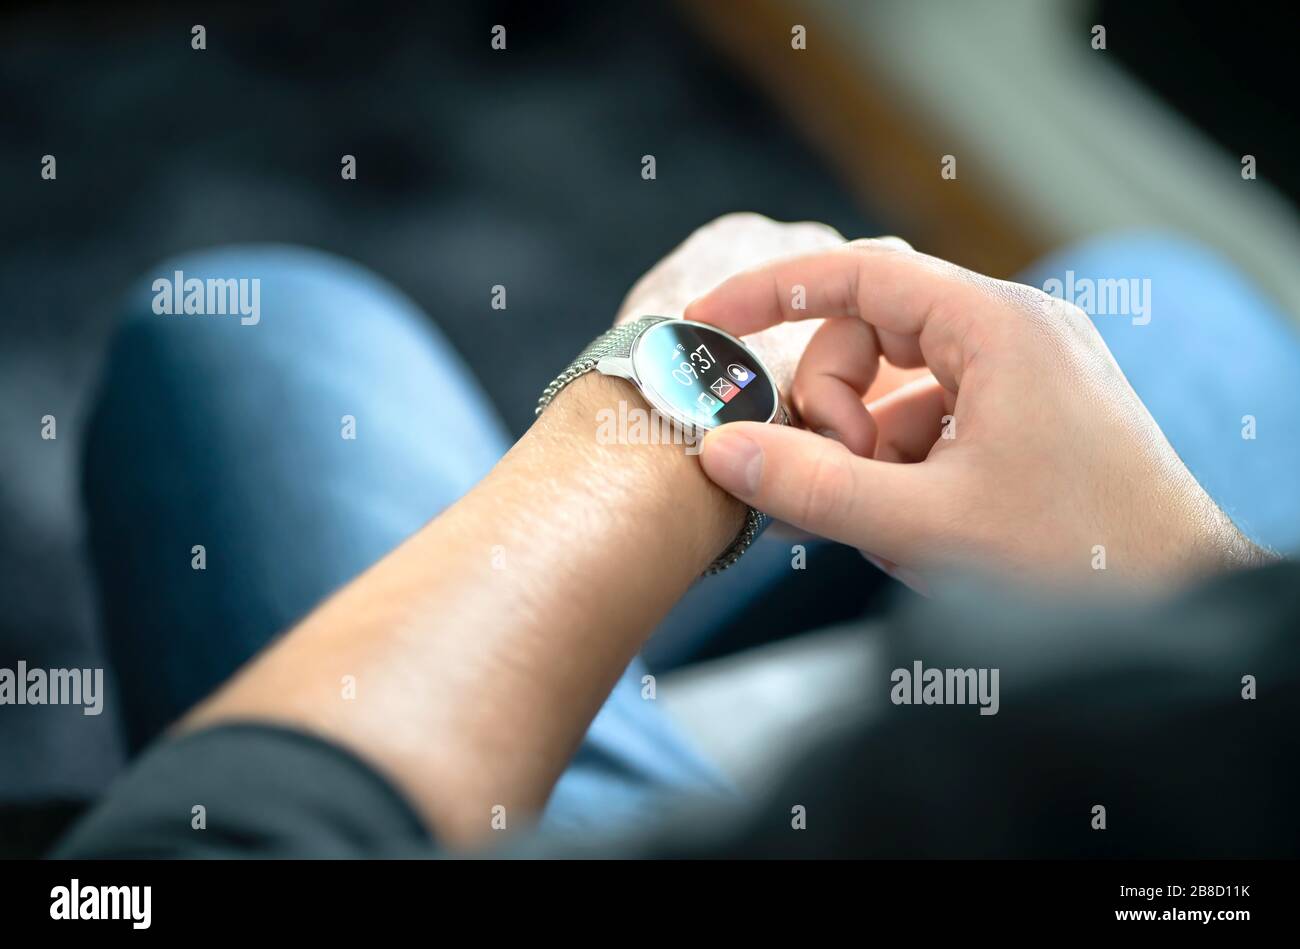 Smart watch, wearable gadget. Man wearing hybrid smartwatch. Wearables with digital touchscreen and mobile app technology. Person using wristwatch. Stock Photo